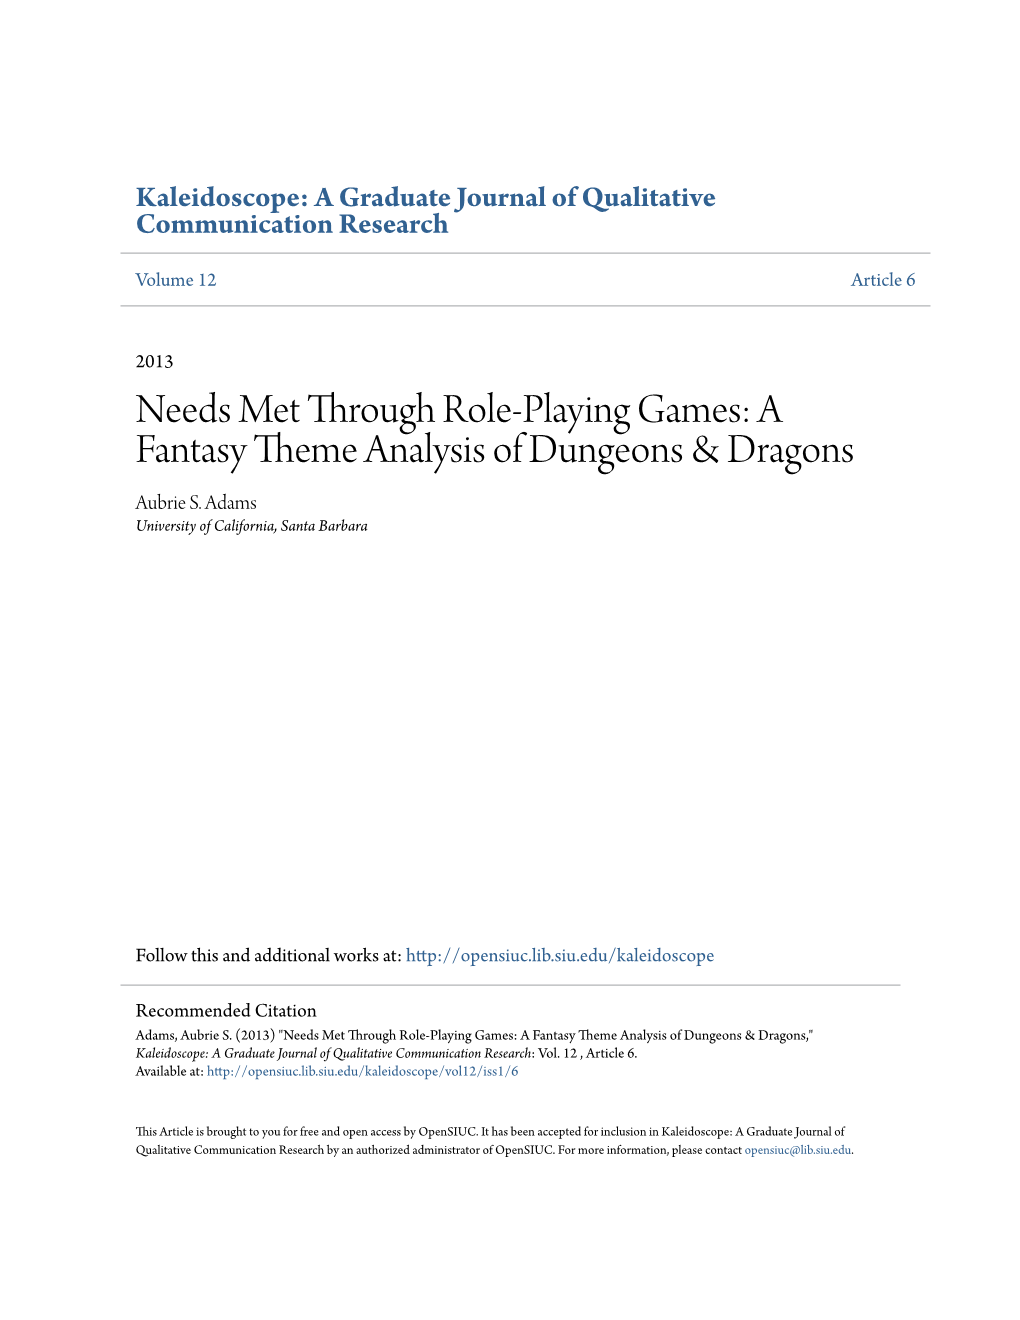 A Fantasy Theme Analysis of Dungeons & Dragons